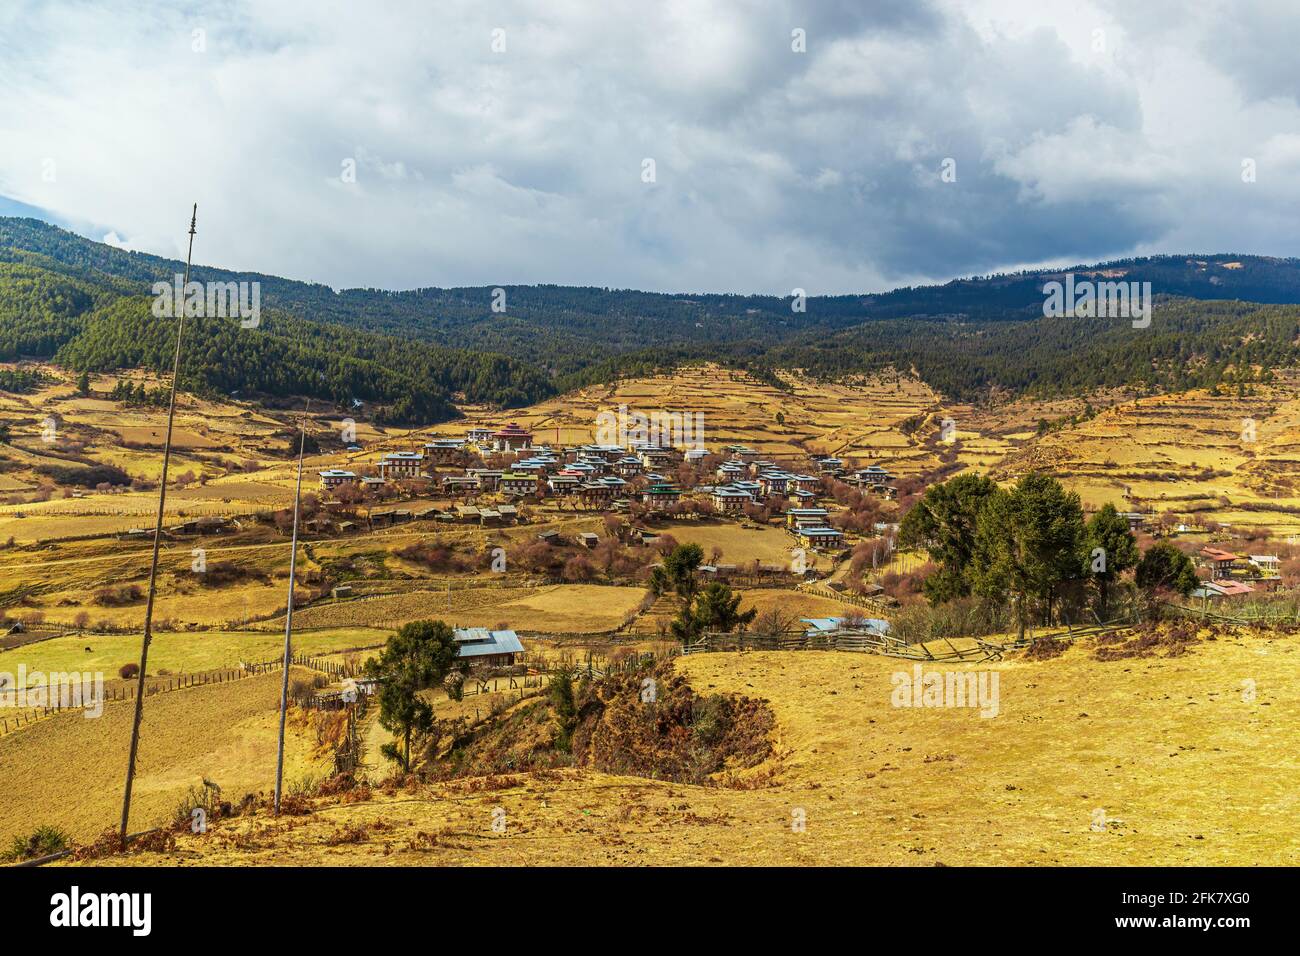 A Bhutanese village in in the region of the Phobjikha Valley Stock Photo